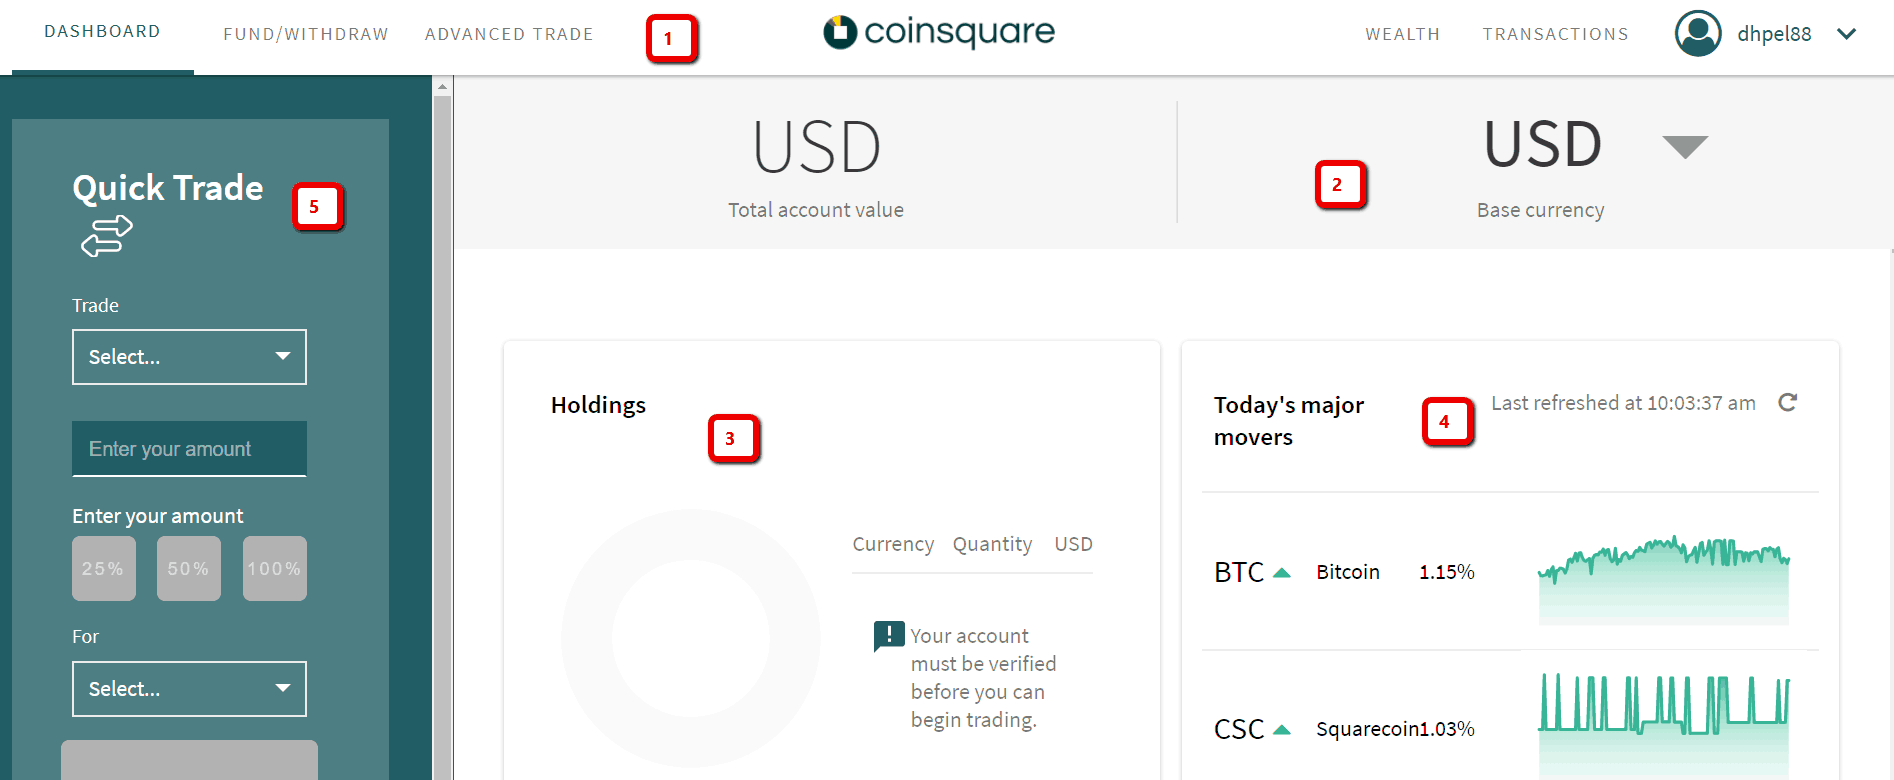 Coinsquare - Trading interface